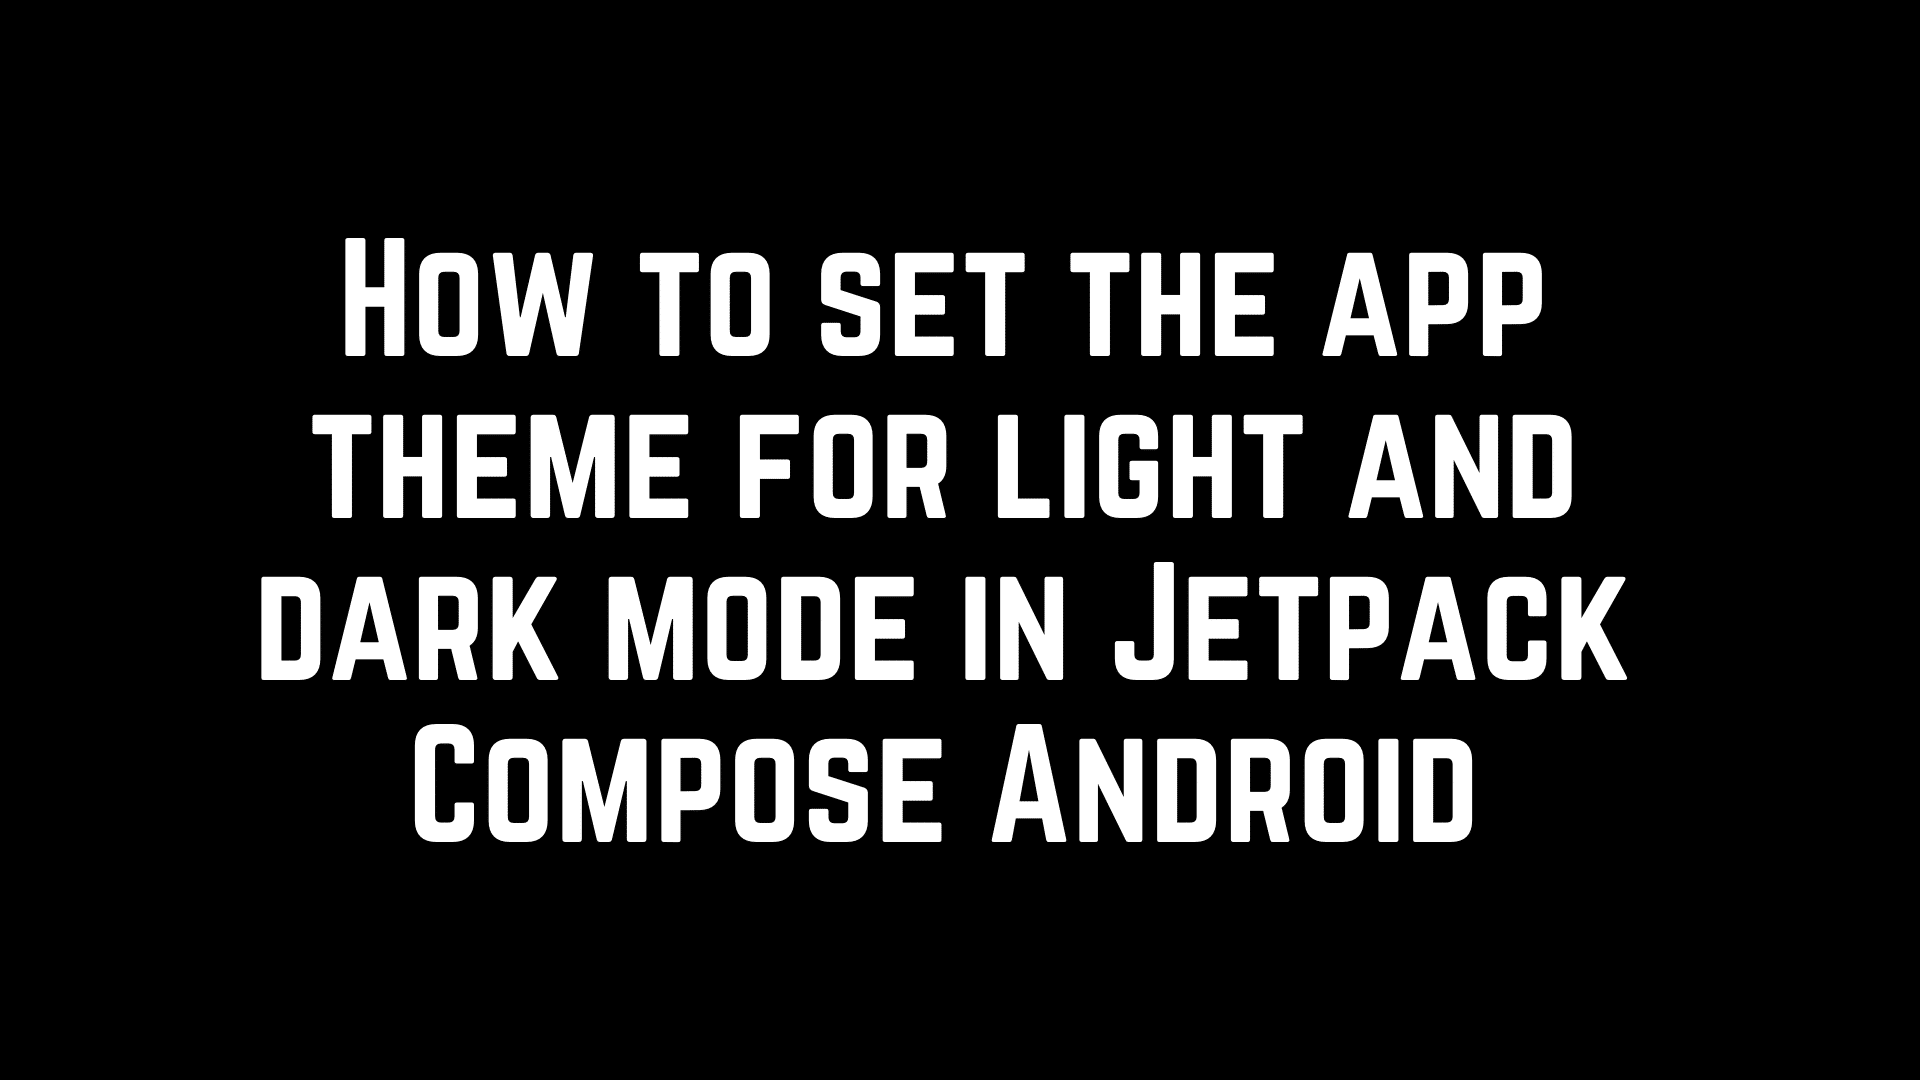 How to set the app theme for light and dark mode in Jetpack Compose Android